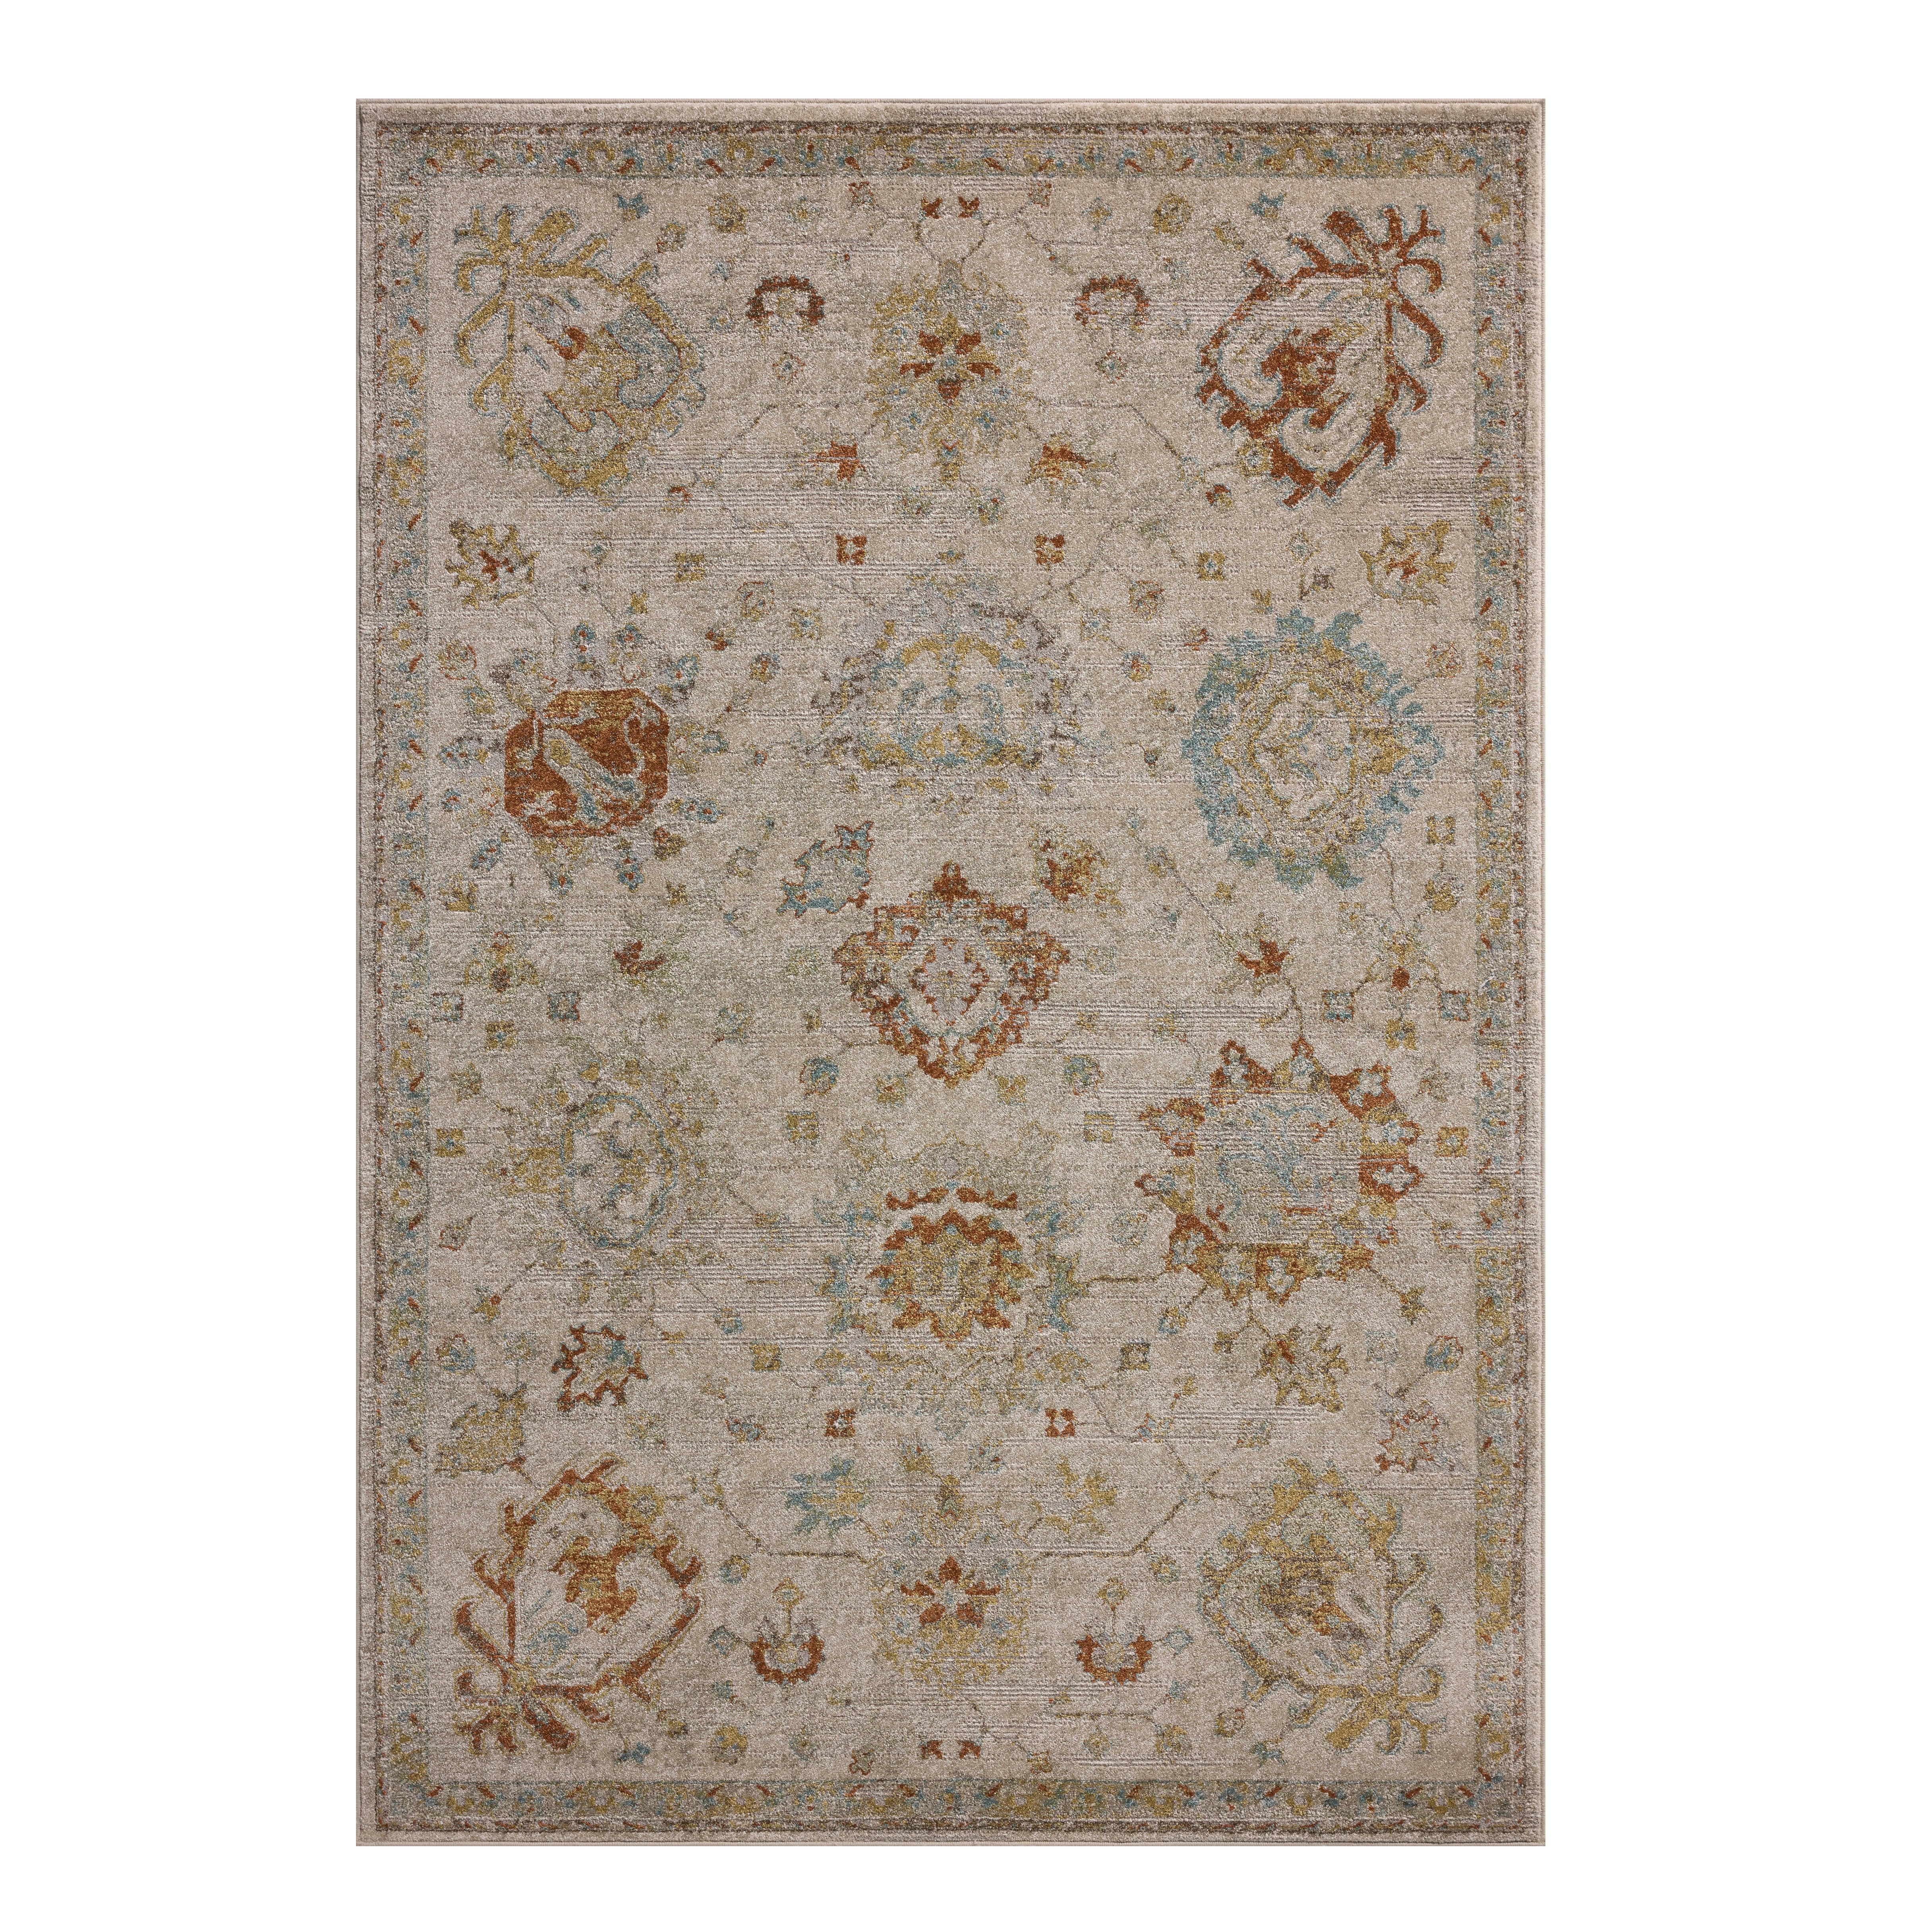 Mona Oatmeal Multi Rug Items range from $79.00 to $1789.00